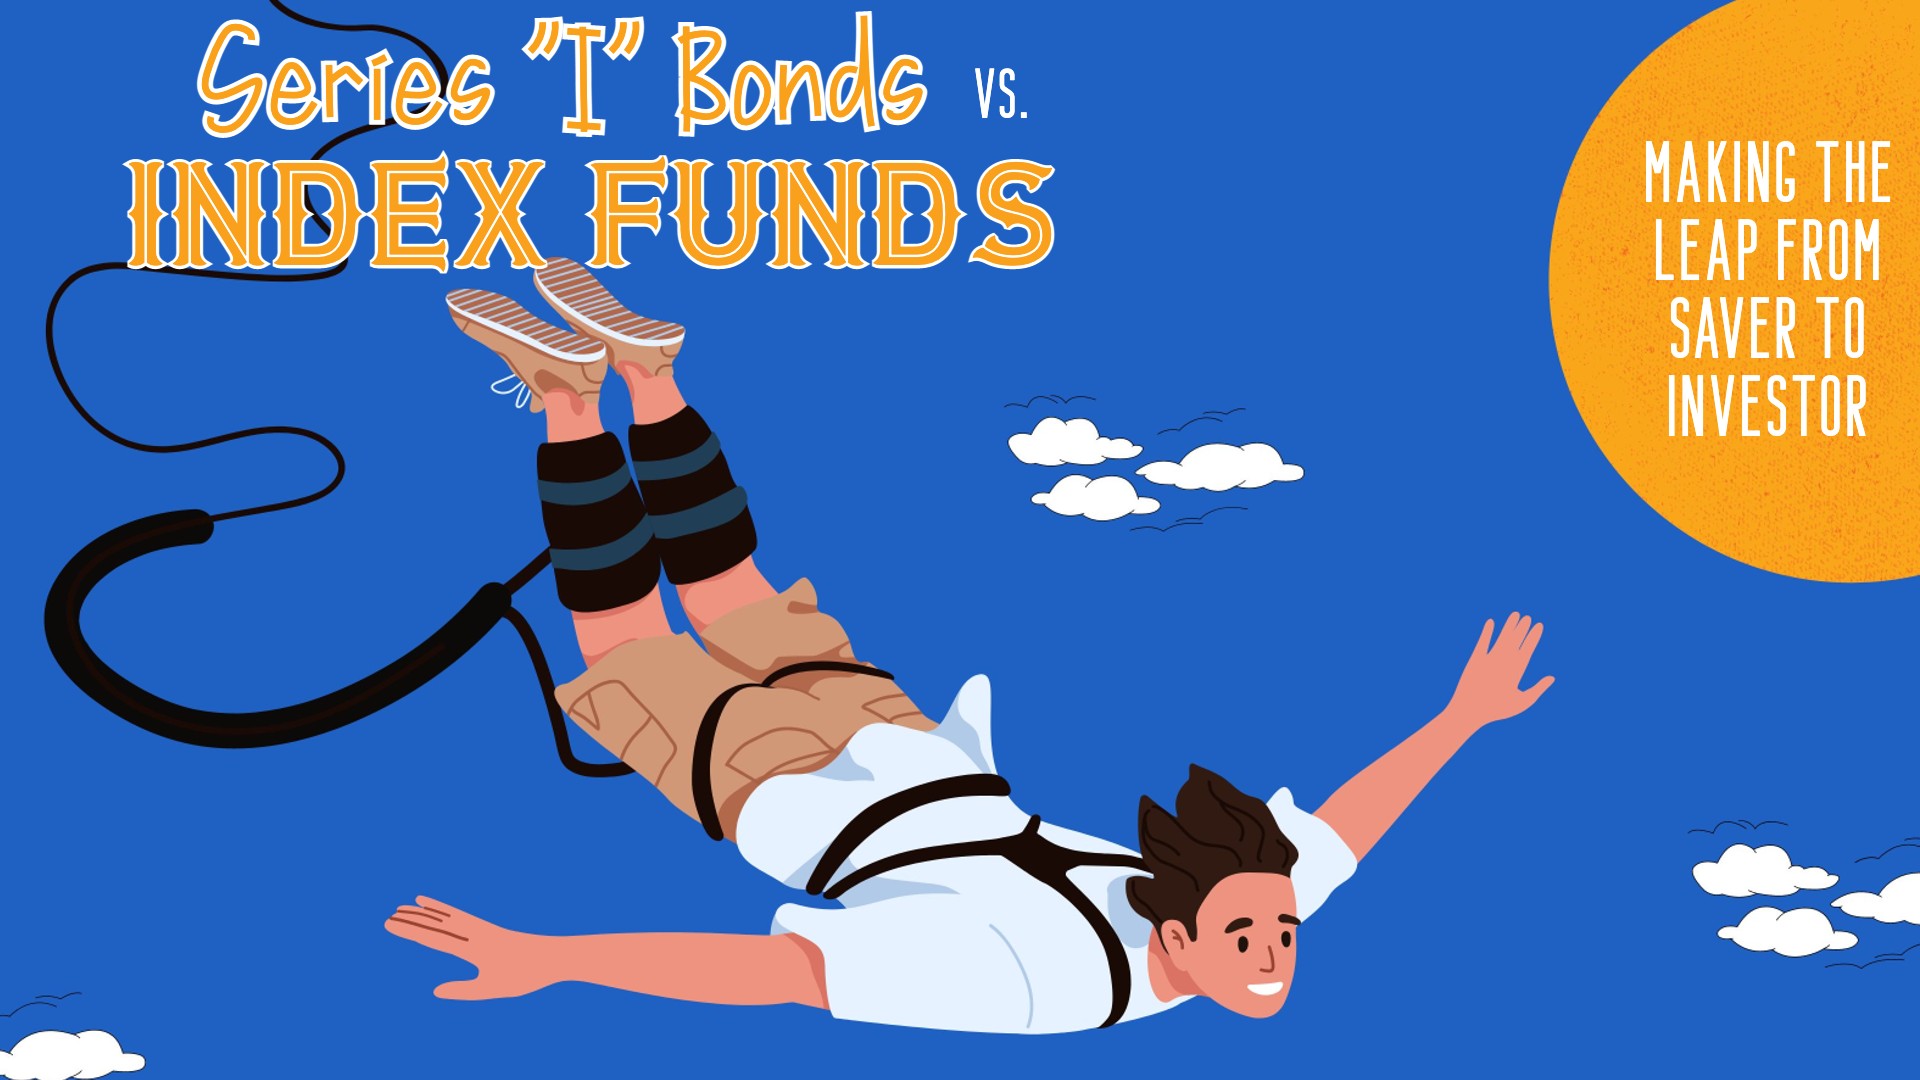 Series “I” Bonds vs Index Funds: Making the Leap From Saver to Investor